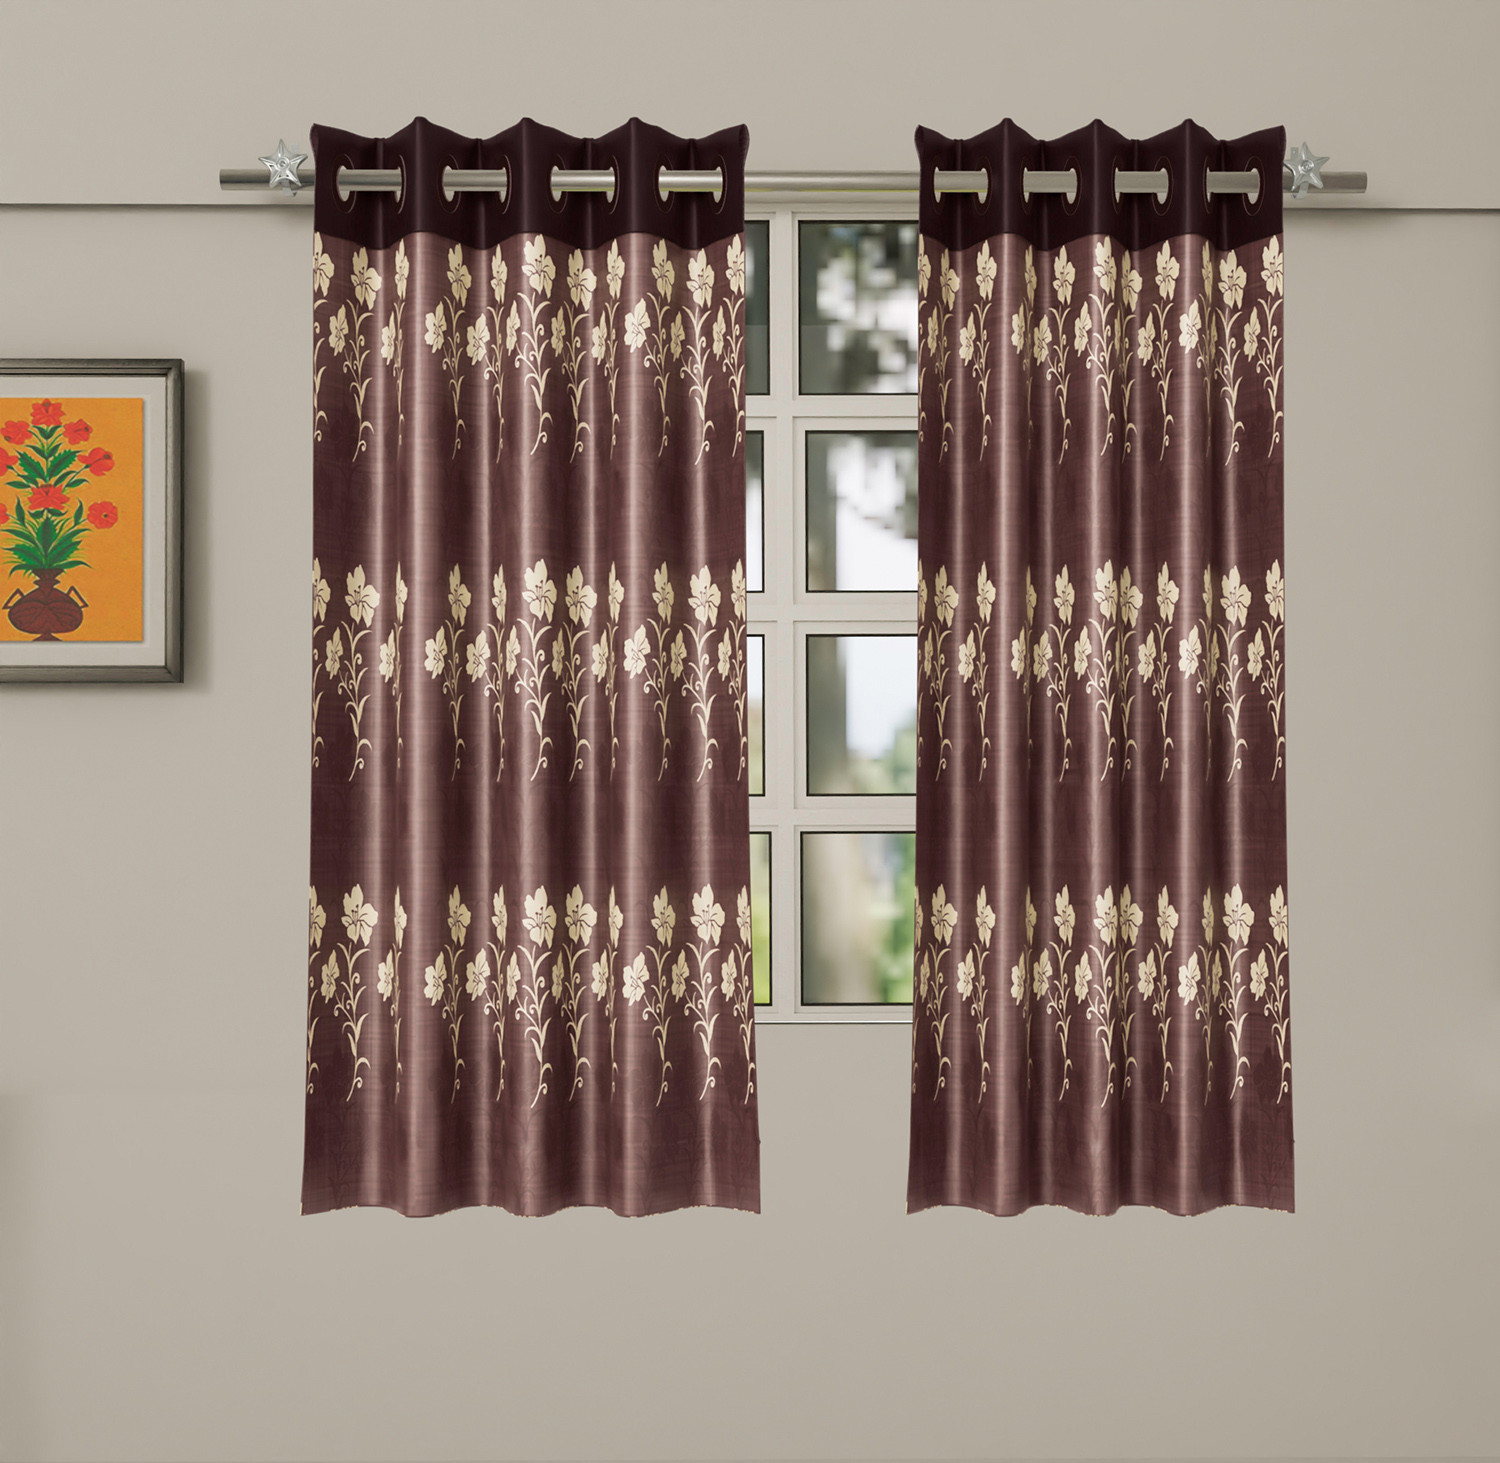 Kuber Industries Faux Silk Decorative 5 Feet Window Curtain |Floral Print Darkening Blackout | Drapes Curtain With 8 Eyelet For Home & Office (Coffee)